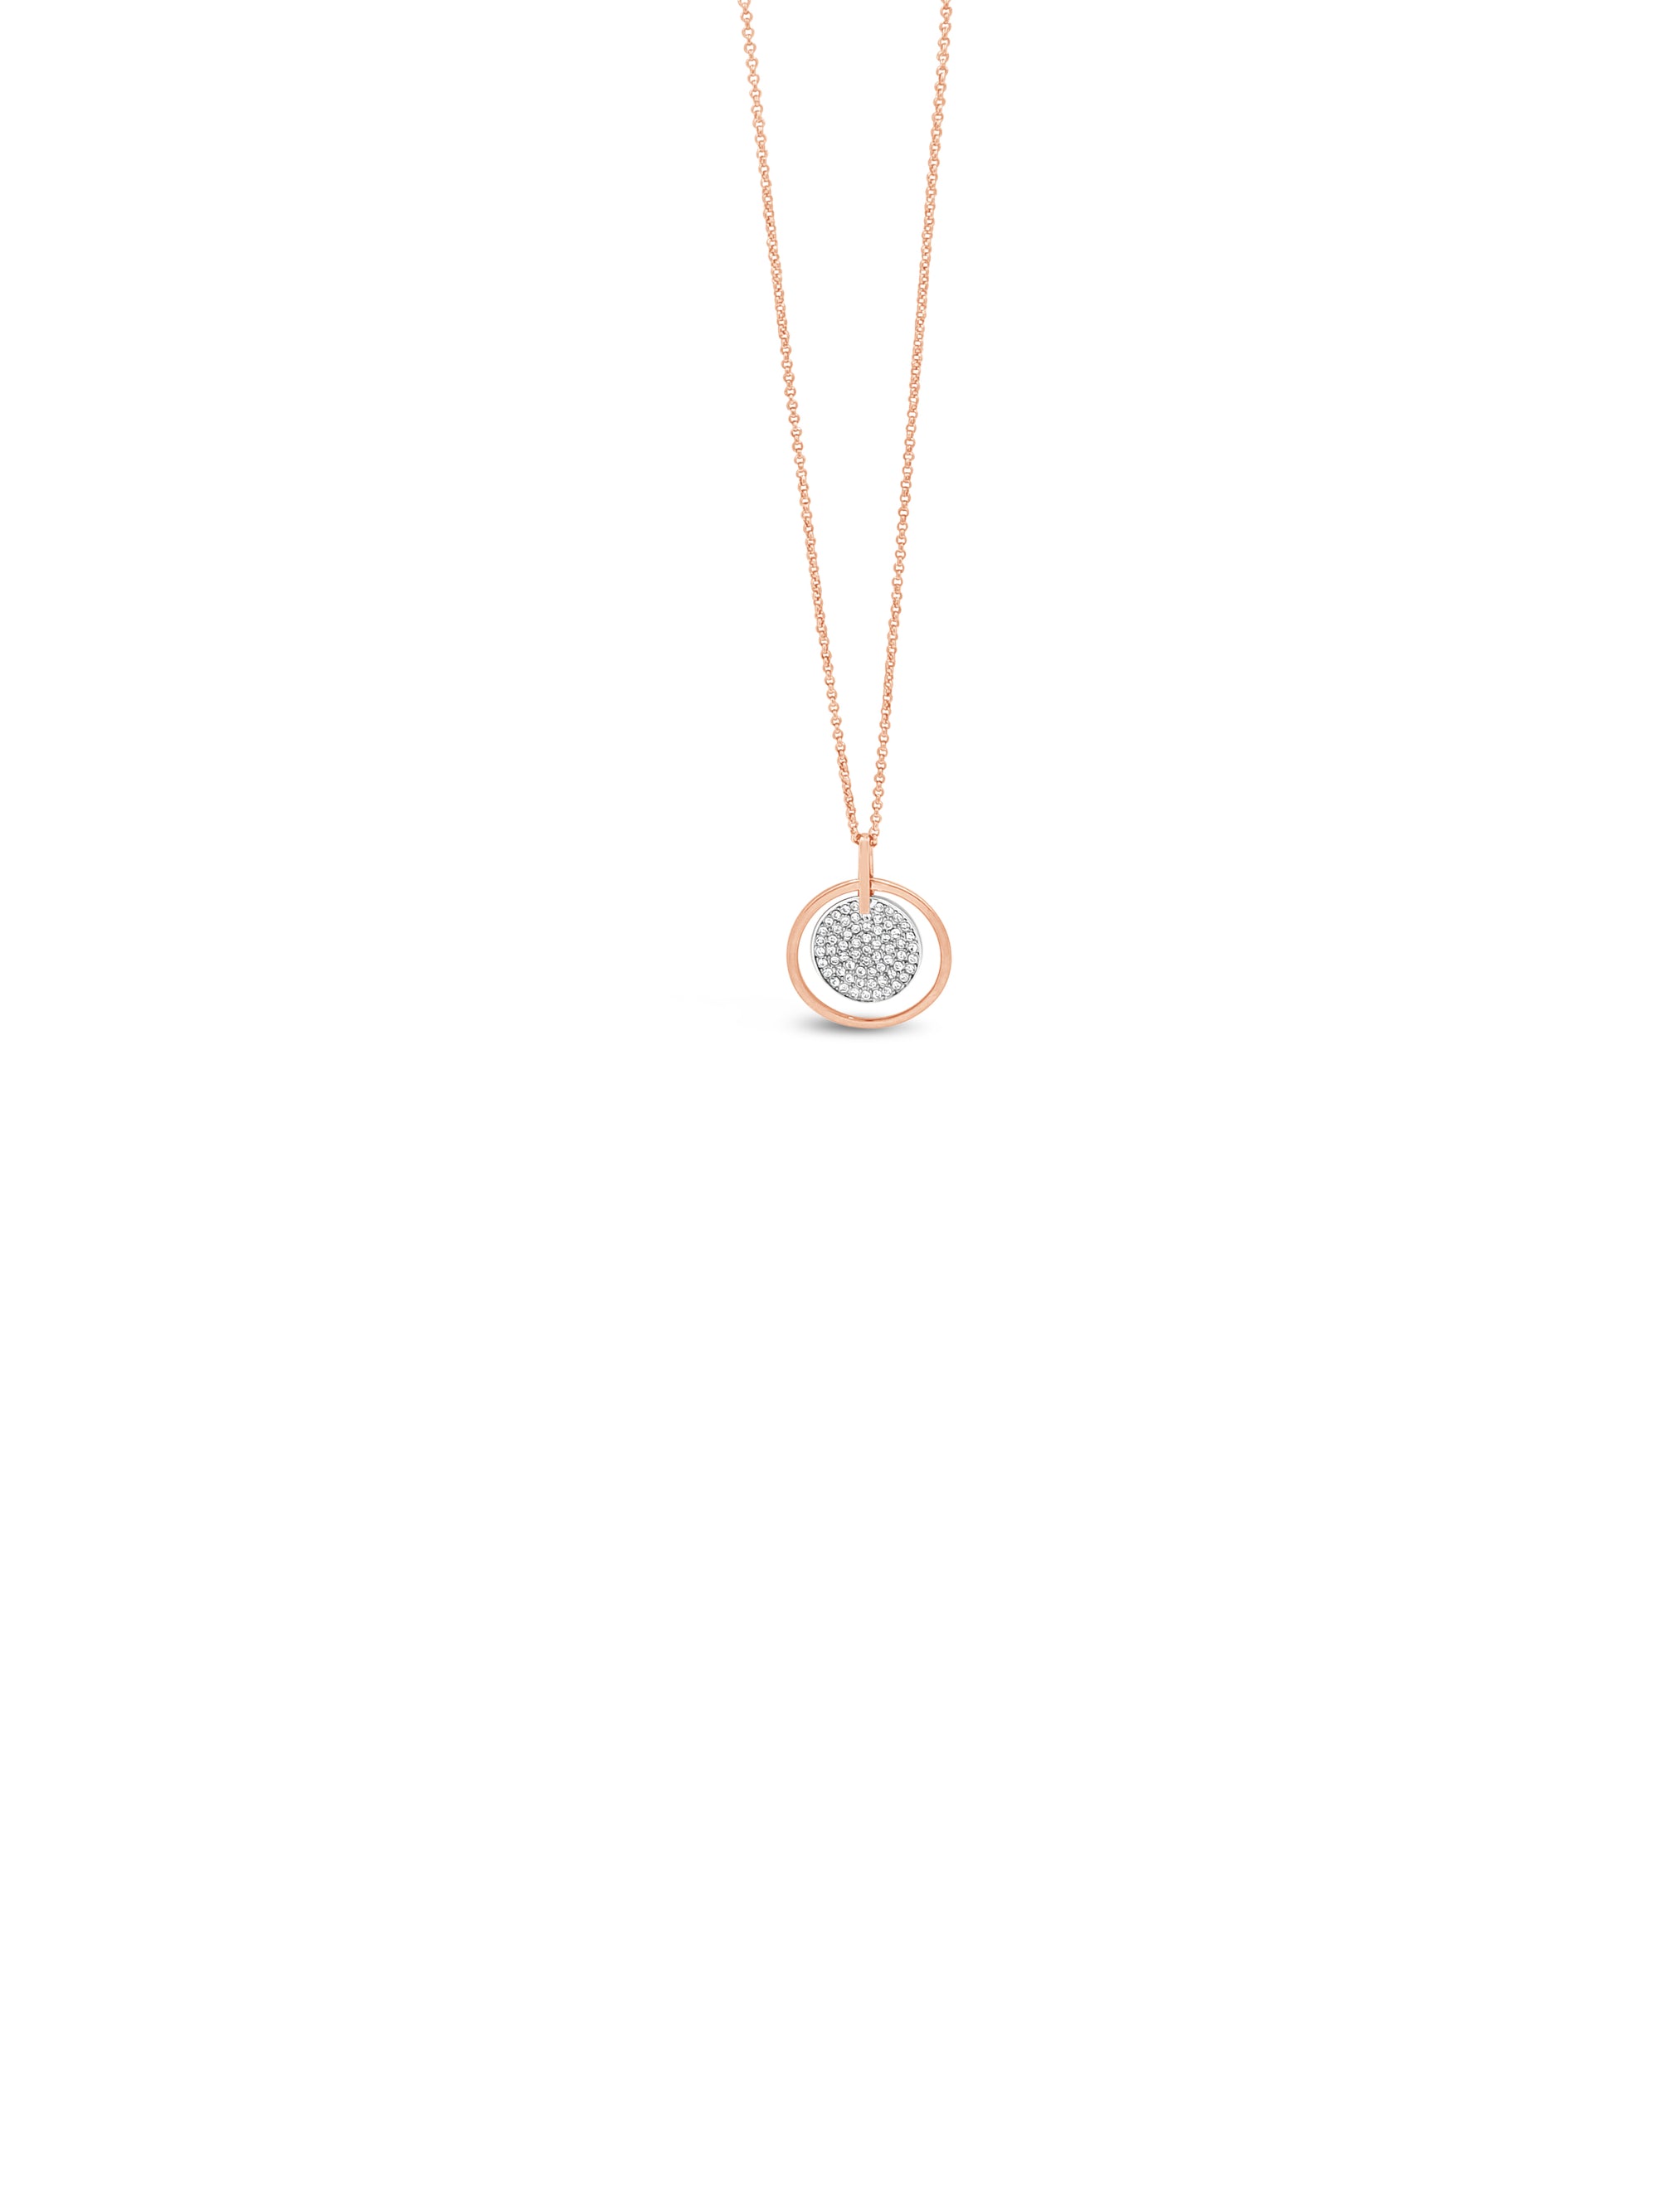 Absolute Jewellery Necklace Rose Gold Mix  18"